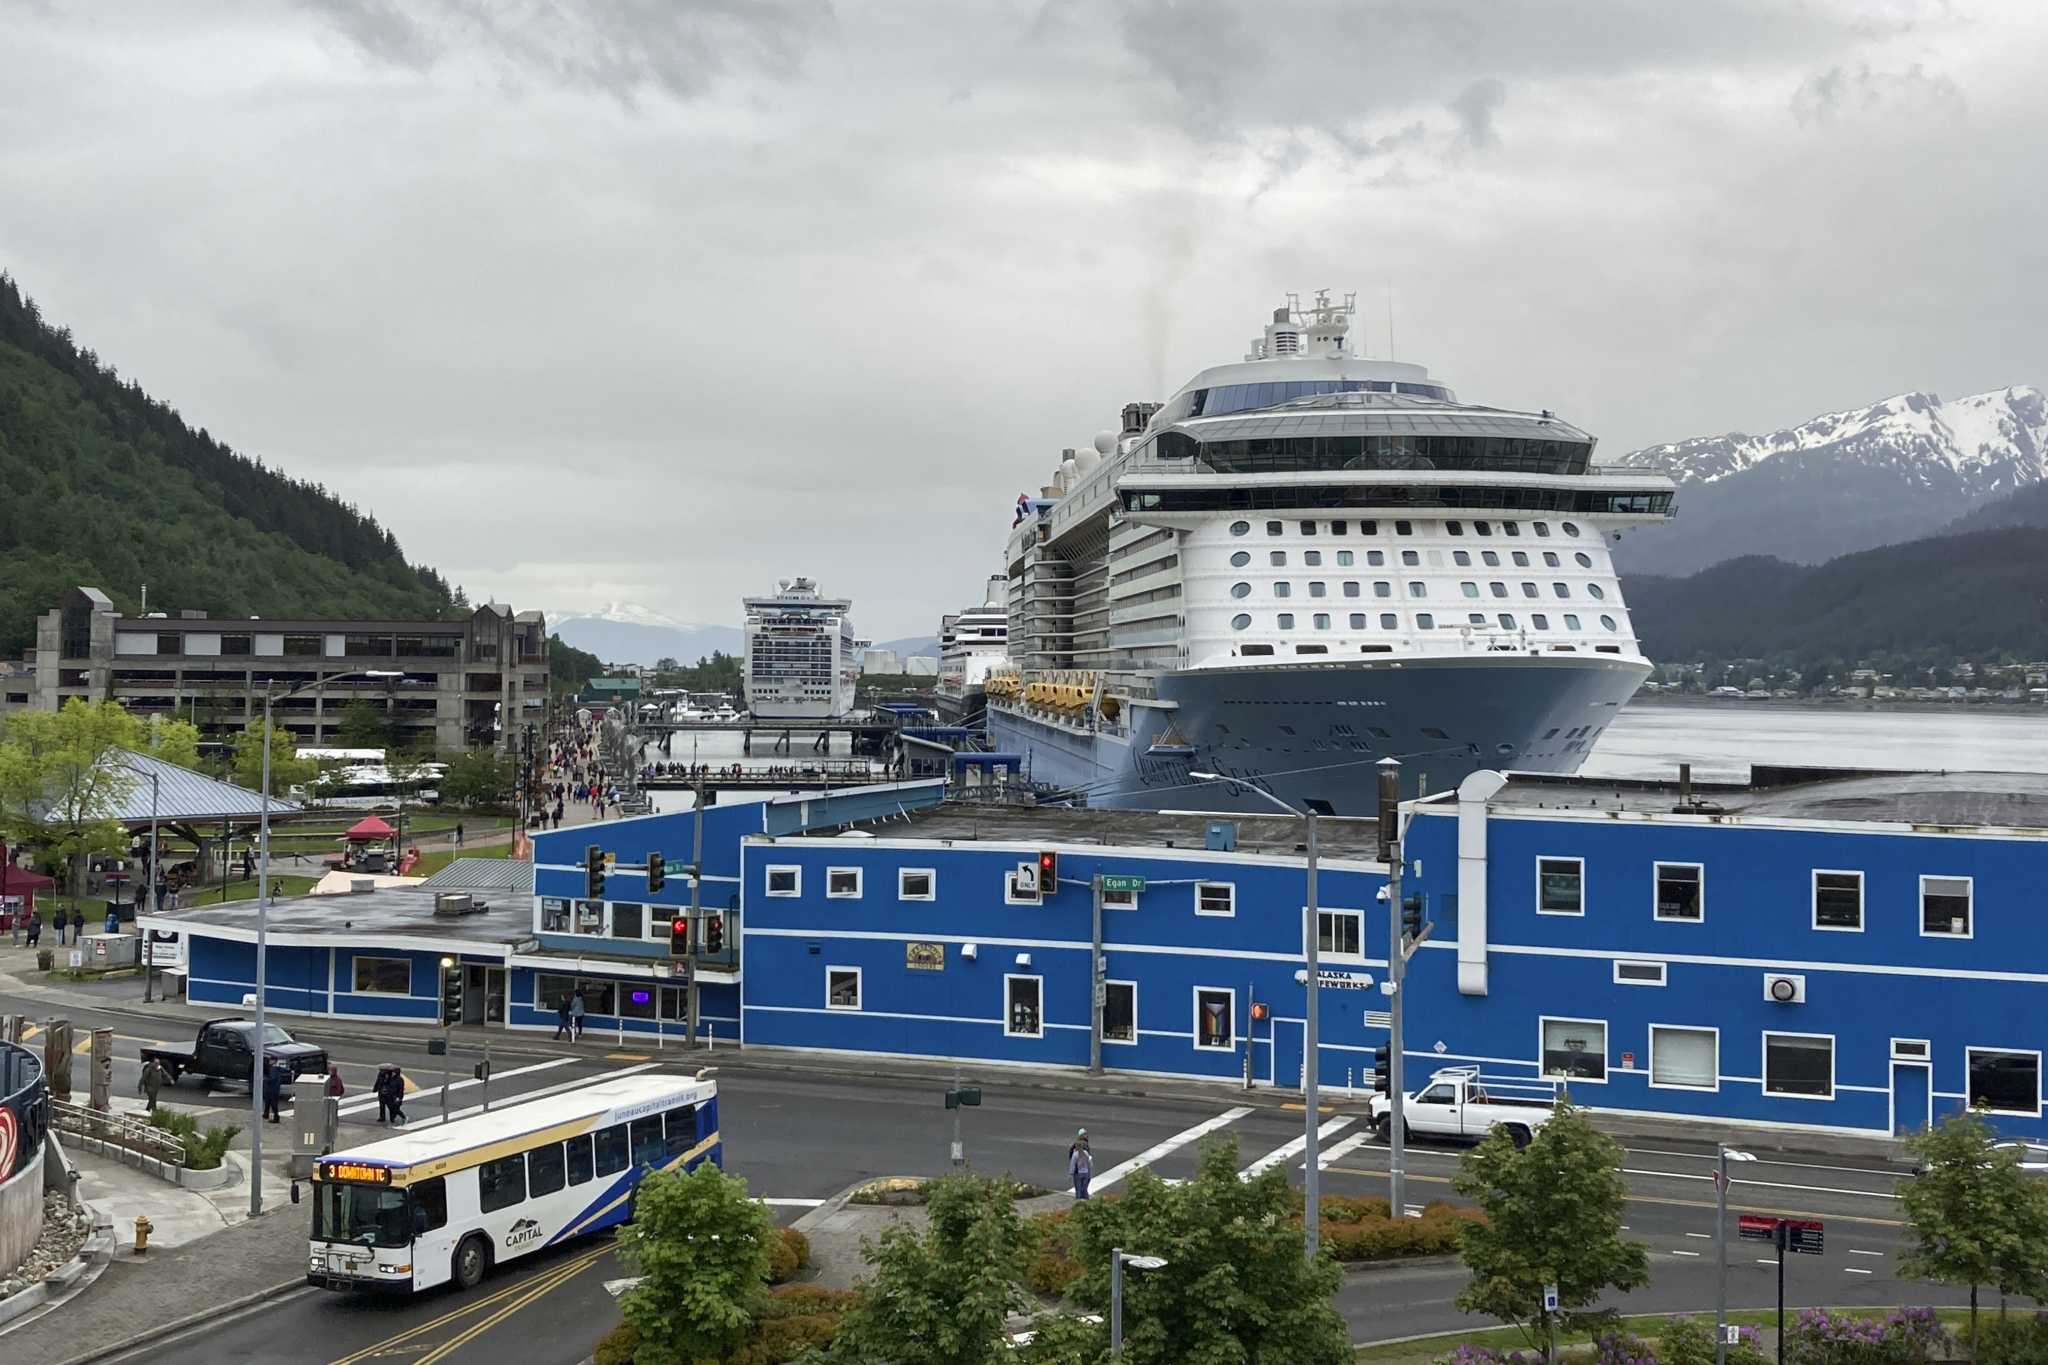 A new agreement would limit cruise passengers in Alaska's capital. A critic says it falls short